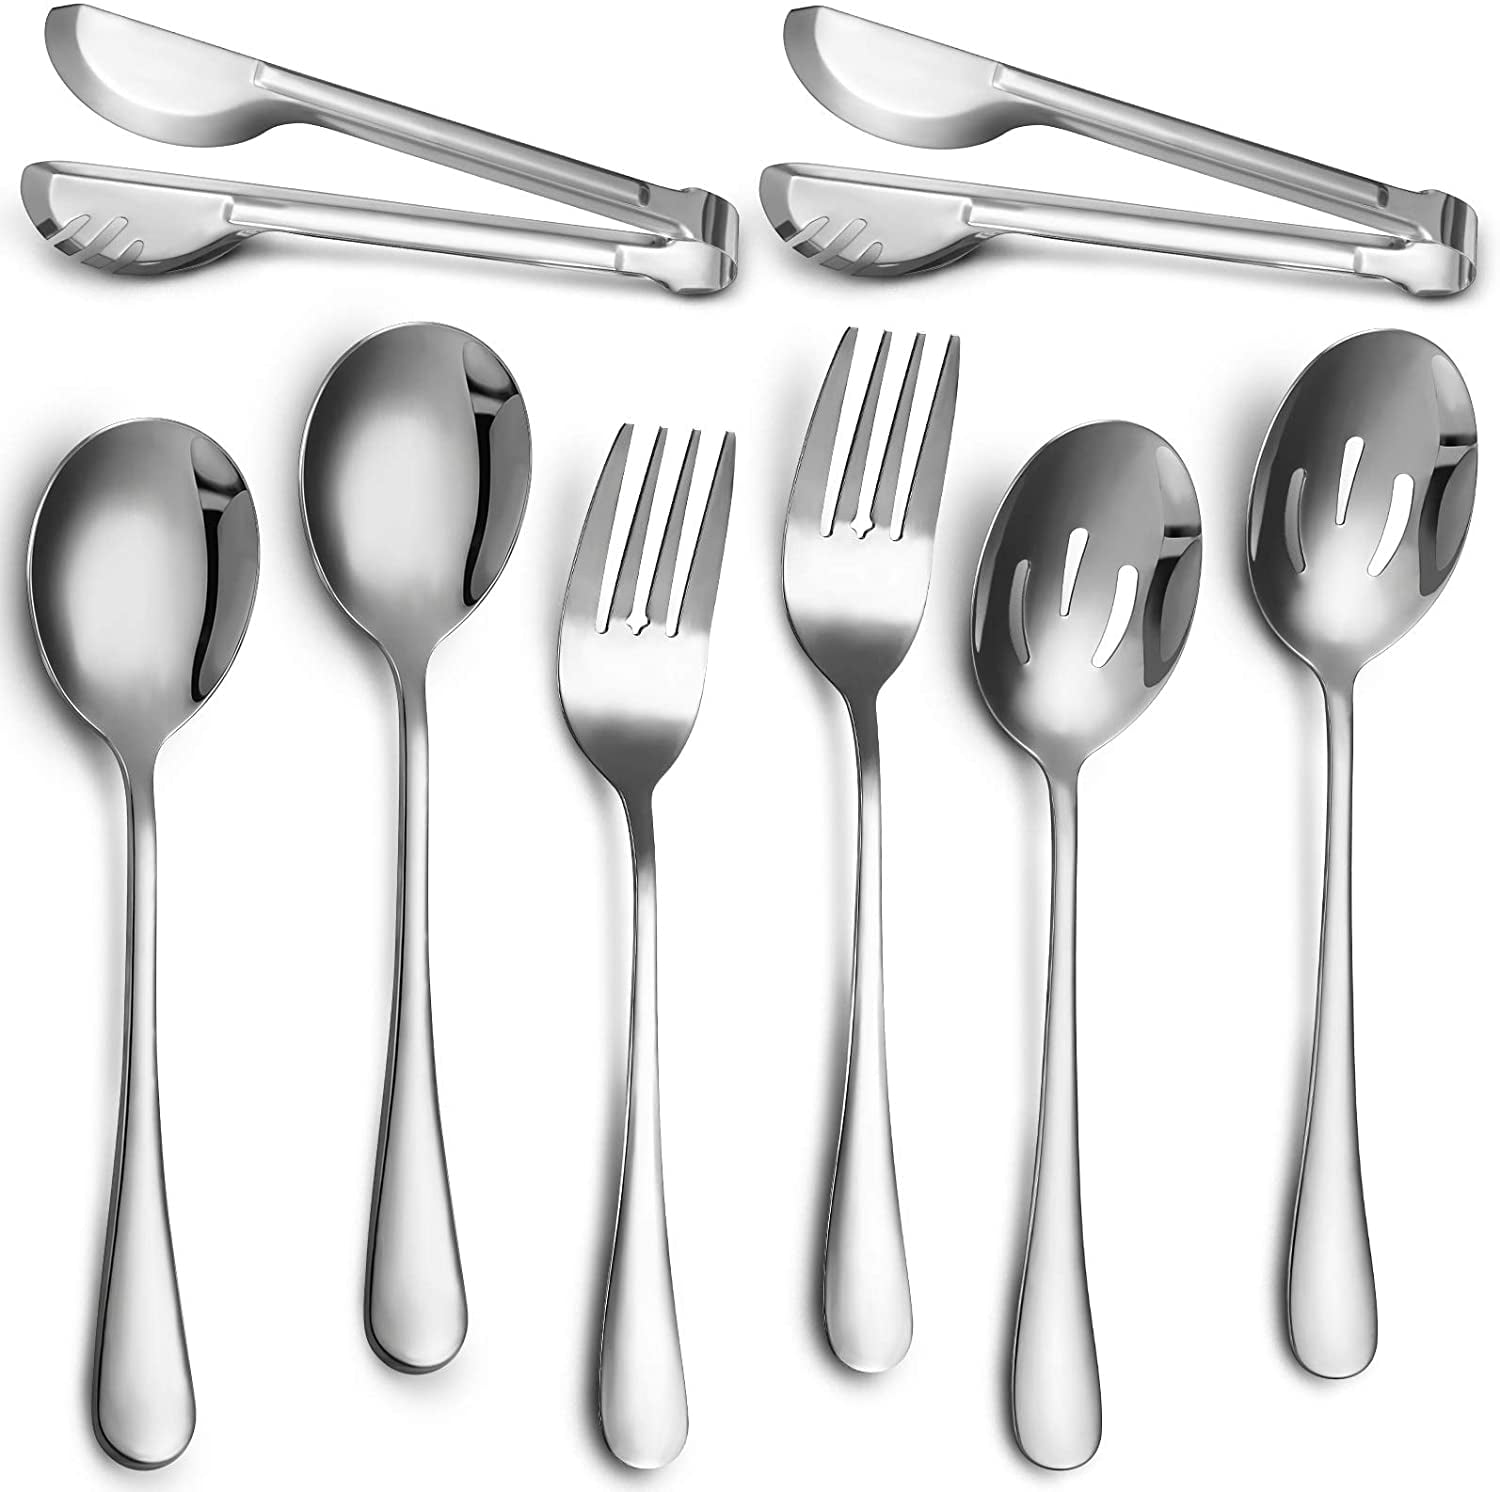 Dishwasher Safe 8.7Inch Stainless Steel Serving Utensils for Party Buffet Restaurant Banquet Dinner Catering LIANYU 8-Piece Black Serving Spoons Black Slotted Serving Spoons 